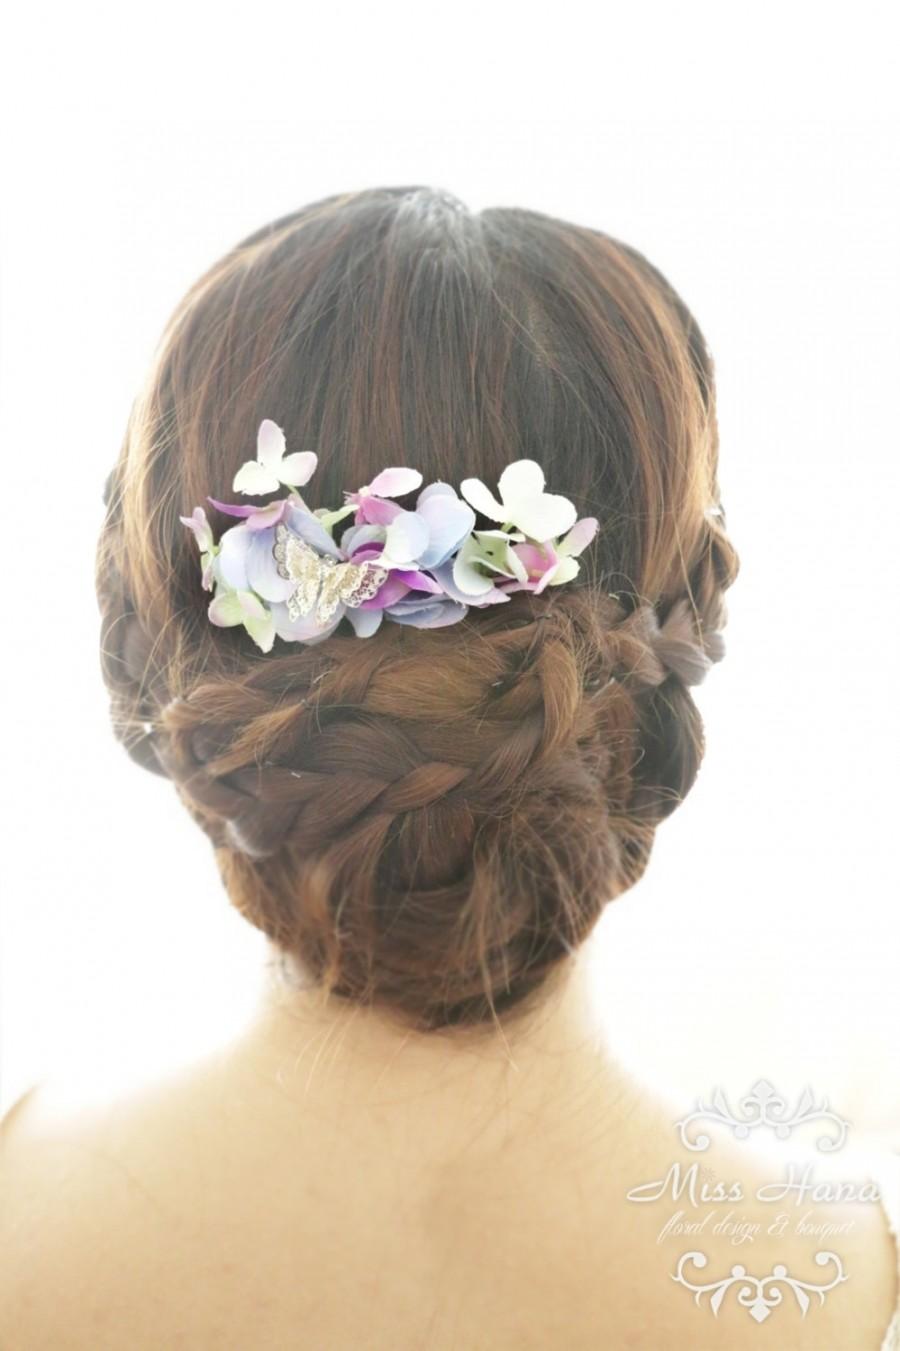 Wedding - Bridal Hair Accessory, purple hydrangea with silver butterfly, Bridal Hair comb hairpiece flower, Rustic Vintage outdoor wedding woodland